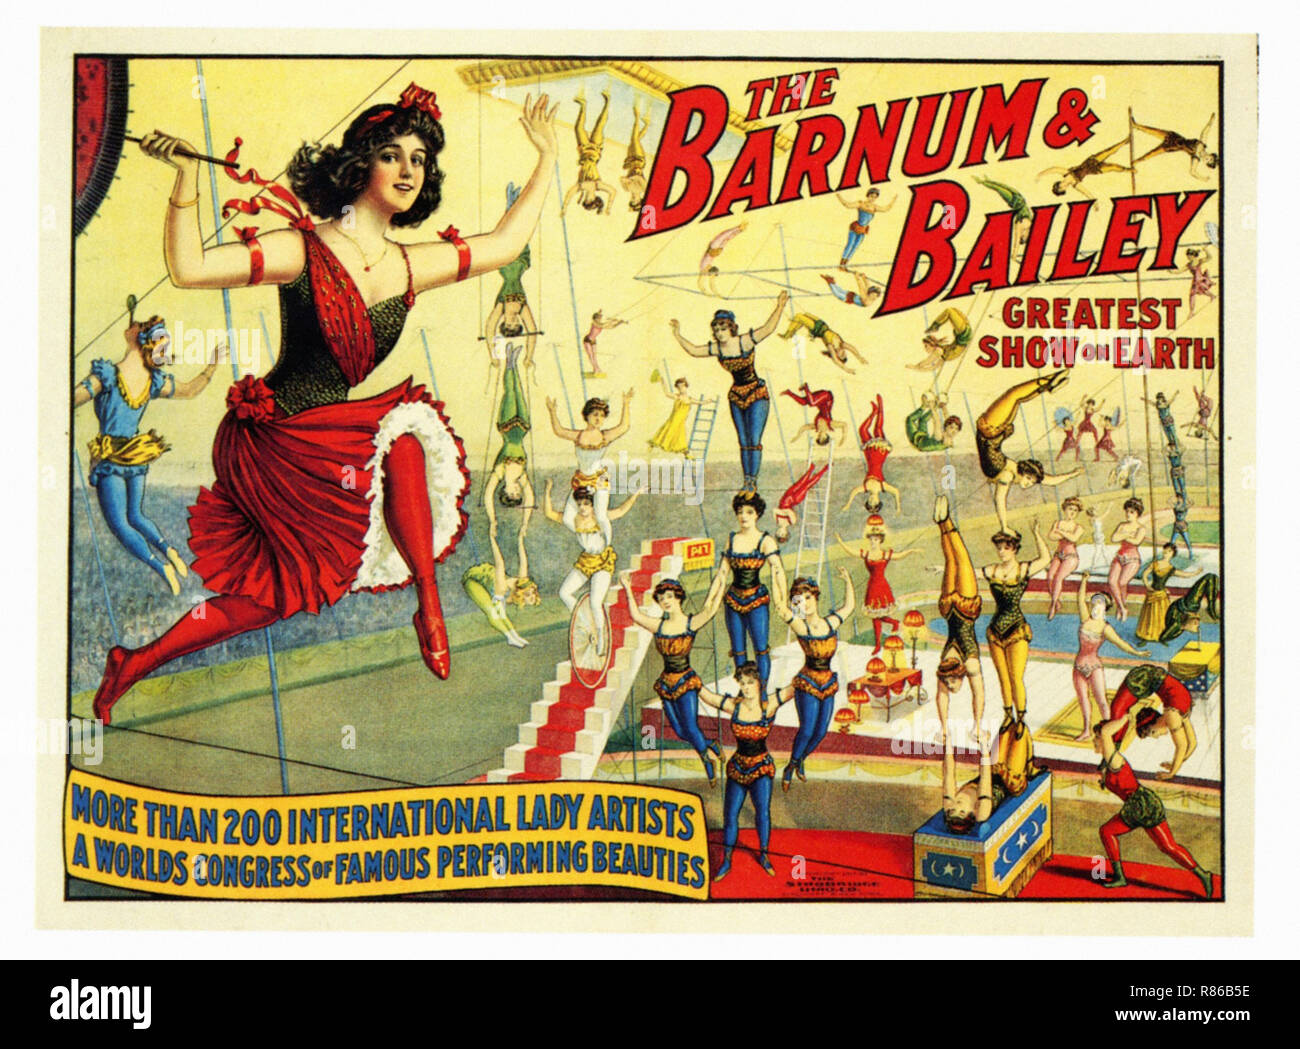 The Barnum Circus - Vintage advertising poster Stock Photo